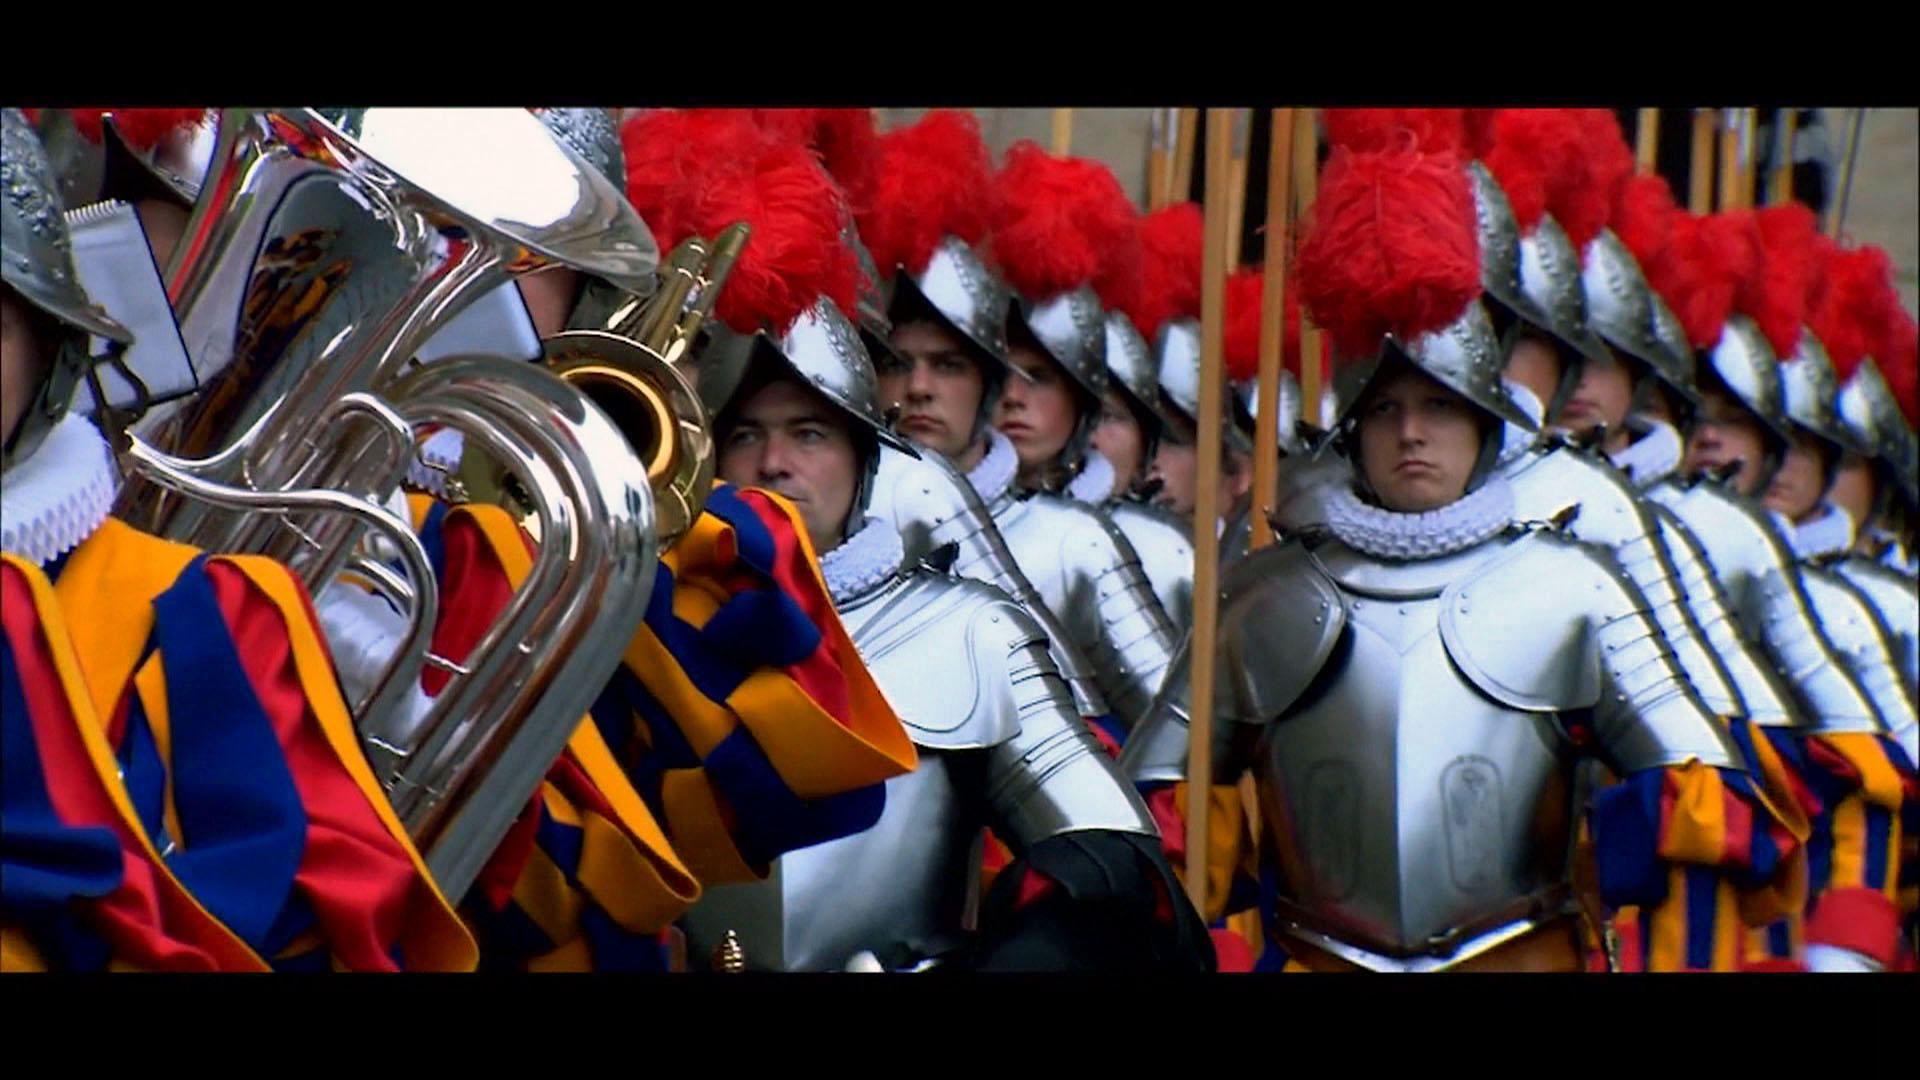 Swiss vatican guards marching